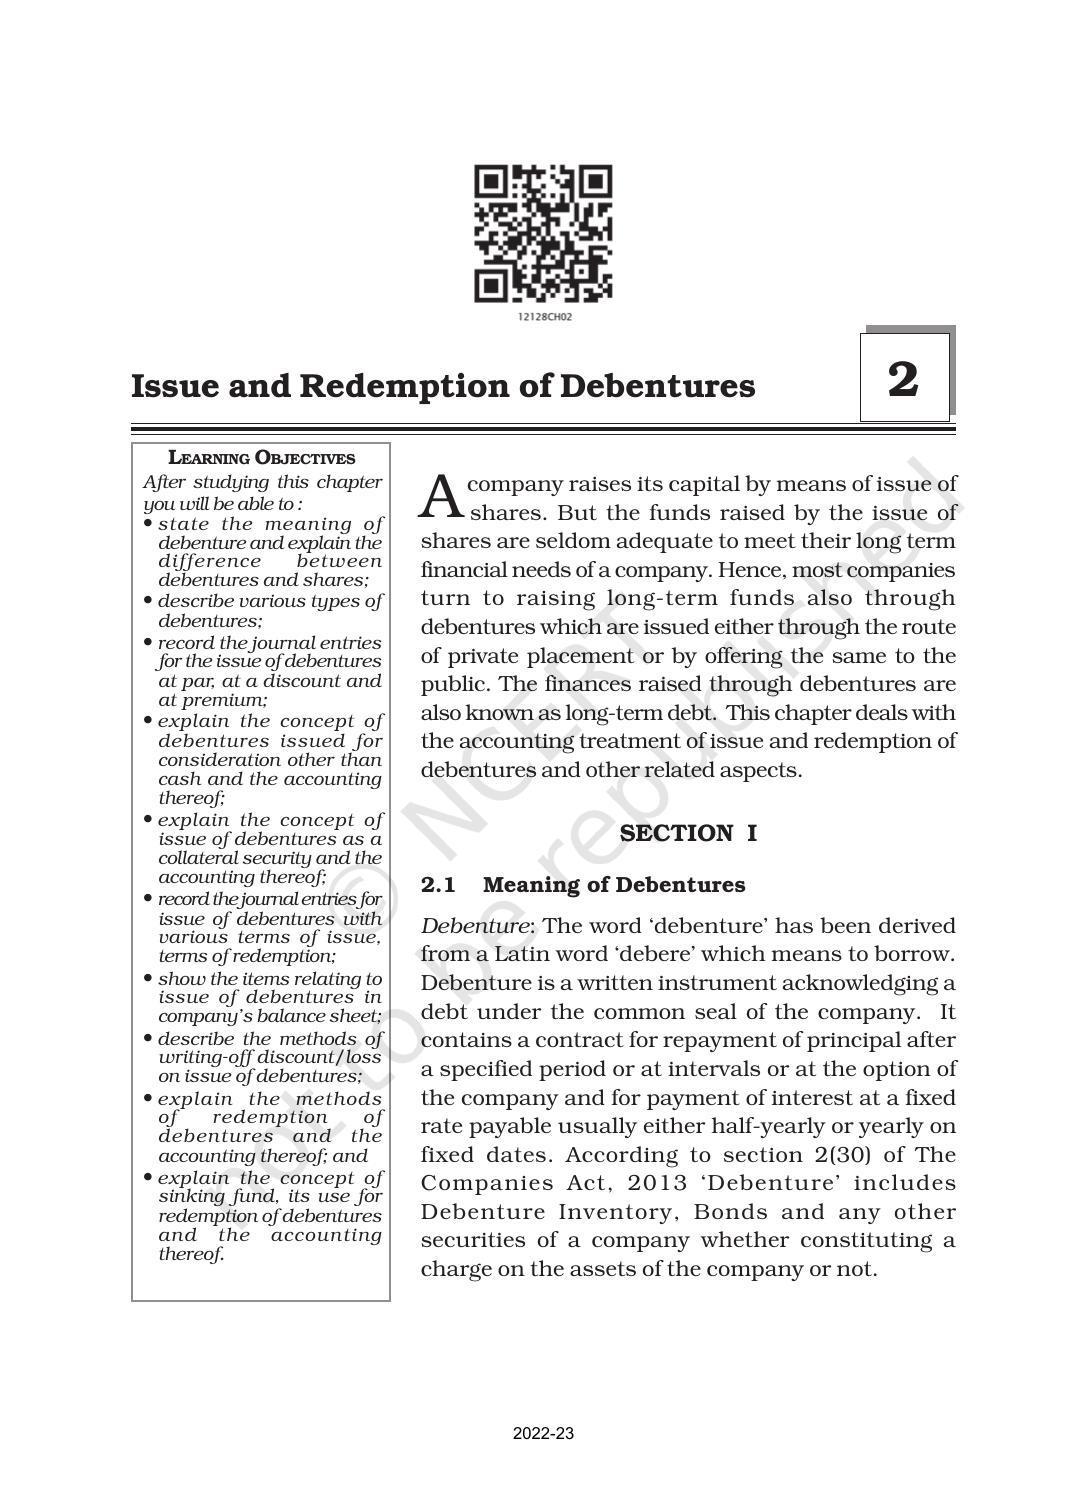 NCERT Book for Class 12 Accountancy Part II Chapter 1 Issue and Redemption of Debentures - Page 1